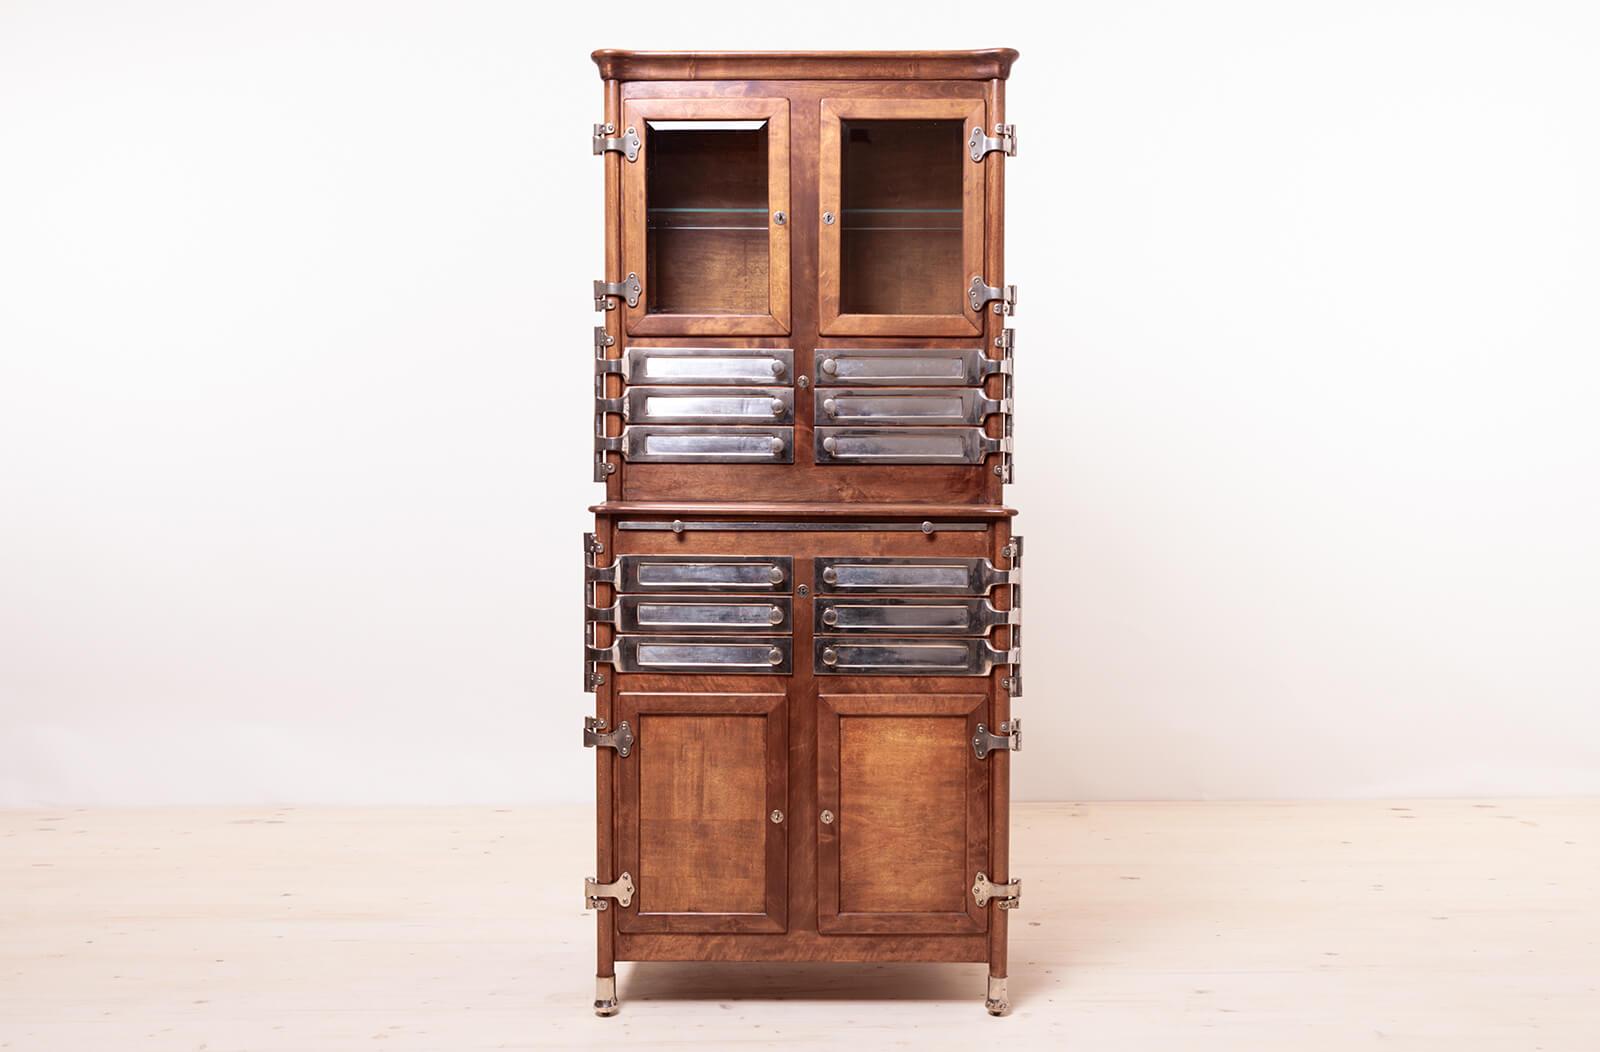 This stunning Dental Cabinet was possibly manufactured in USA by Lee Smith & Sons in Pittsburgh, Pennsylvania. Notable for its distinctive nickel hinges and trim, as well as the iconic swing-out drawers synonymous with Lee Smith & Sons, this piece